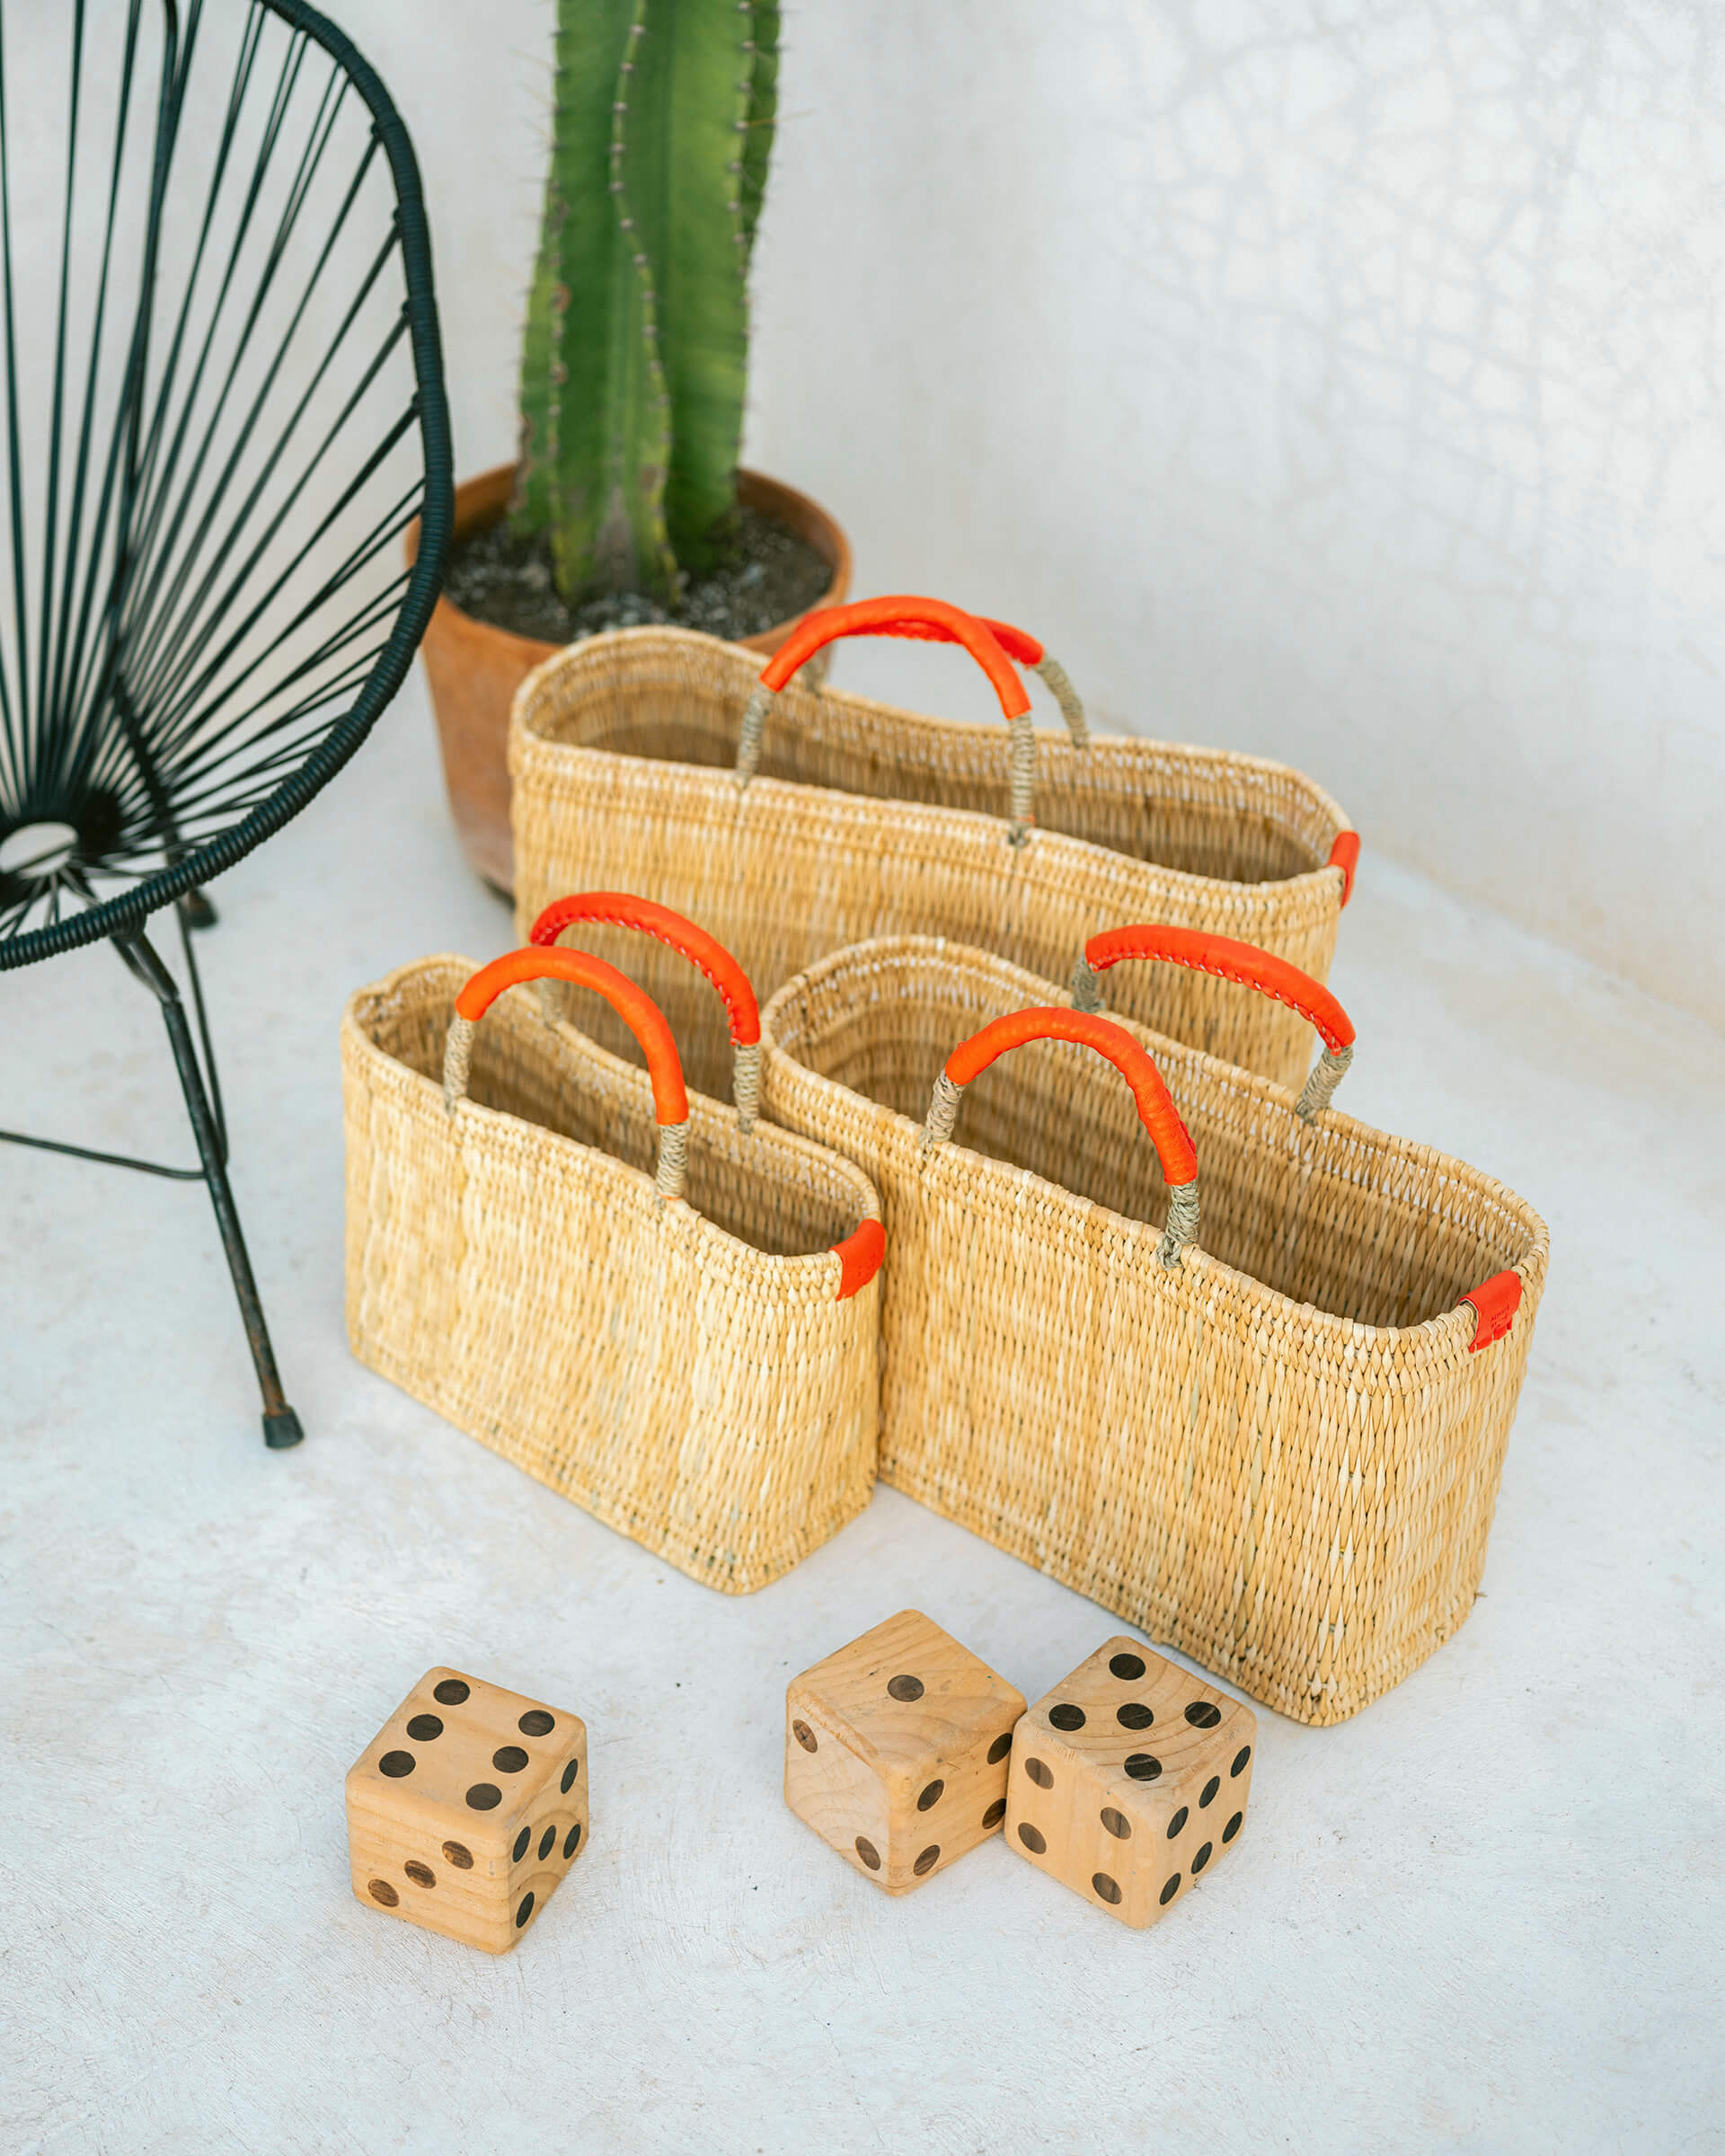 small, medium, large straw basket wrapped with orange leather handles clustered near dice and chair